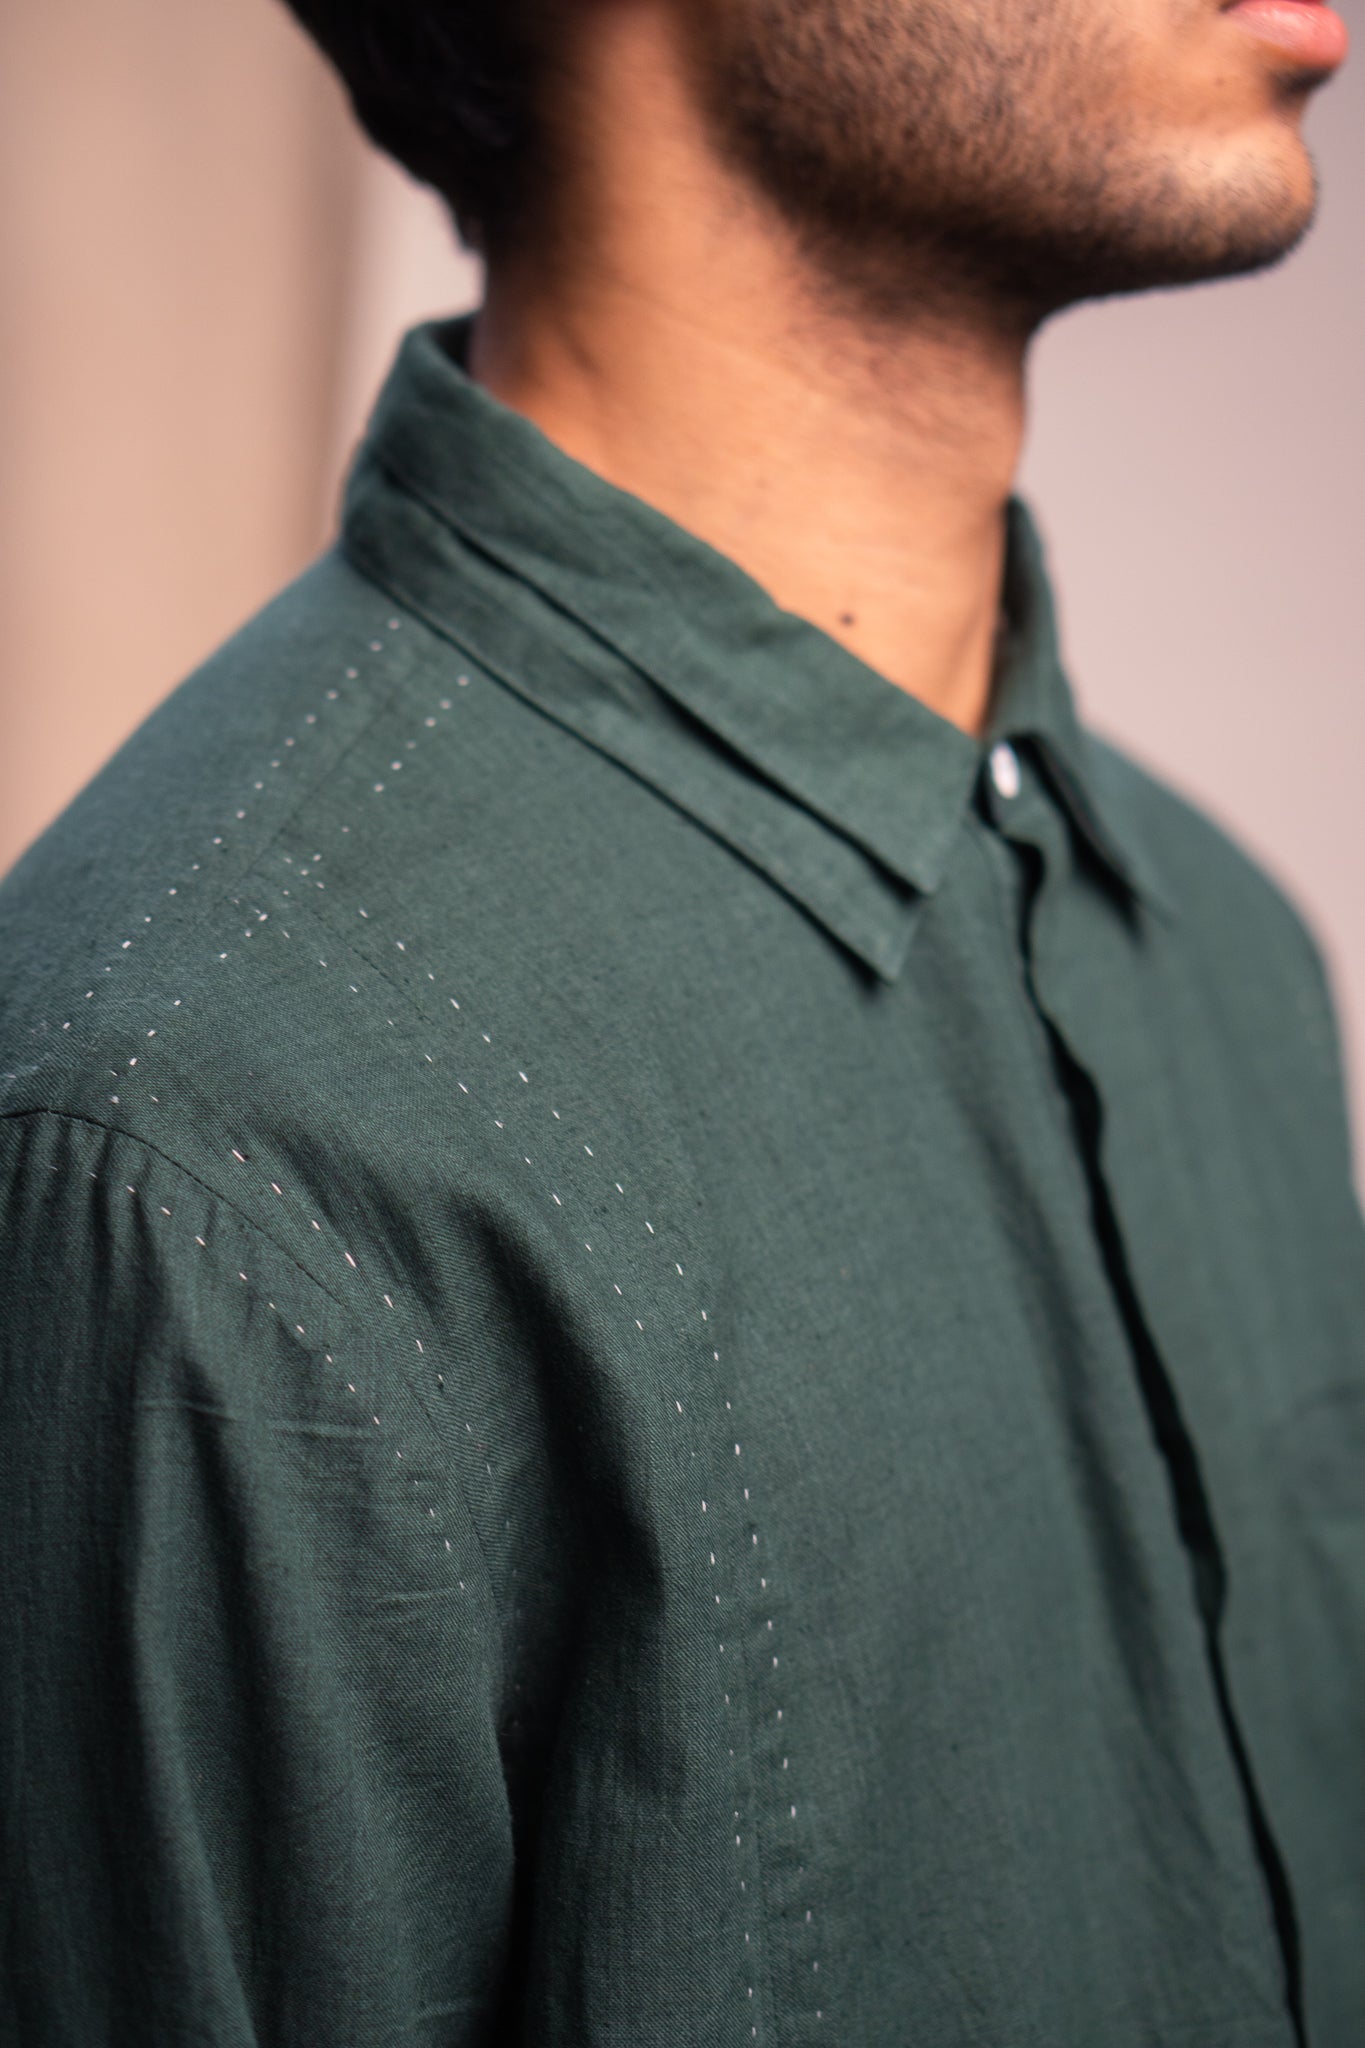 Button Detail Shirt at Kamakhyaa by Lafaani. This item is 100% pure cotton, Casual Wear, Green, Menswear, Natural with azo free dyes, Organic, Regular Fit, Rewind, Shirts, Solids